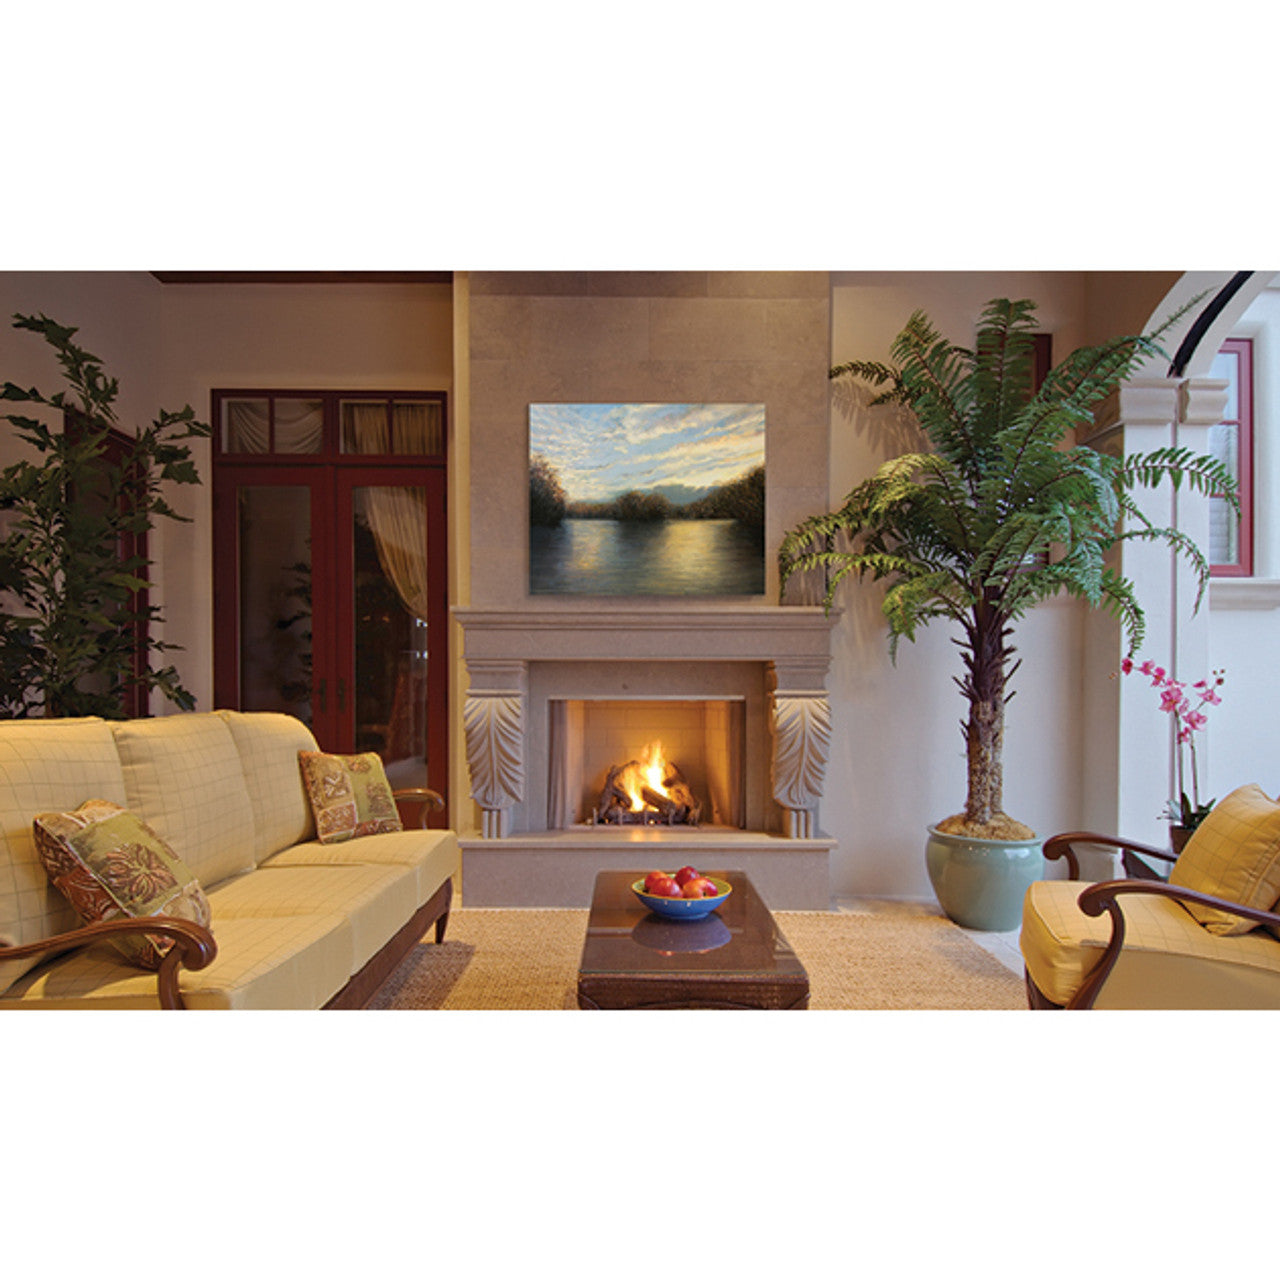 Superior 42 Inch Vent Free Outdoor Gas Fireplace - VRE4342